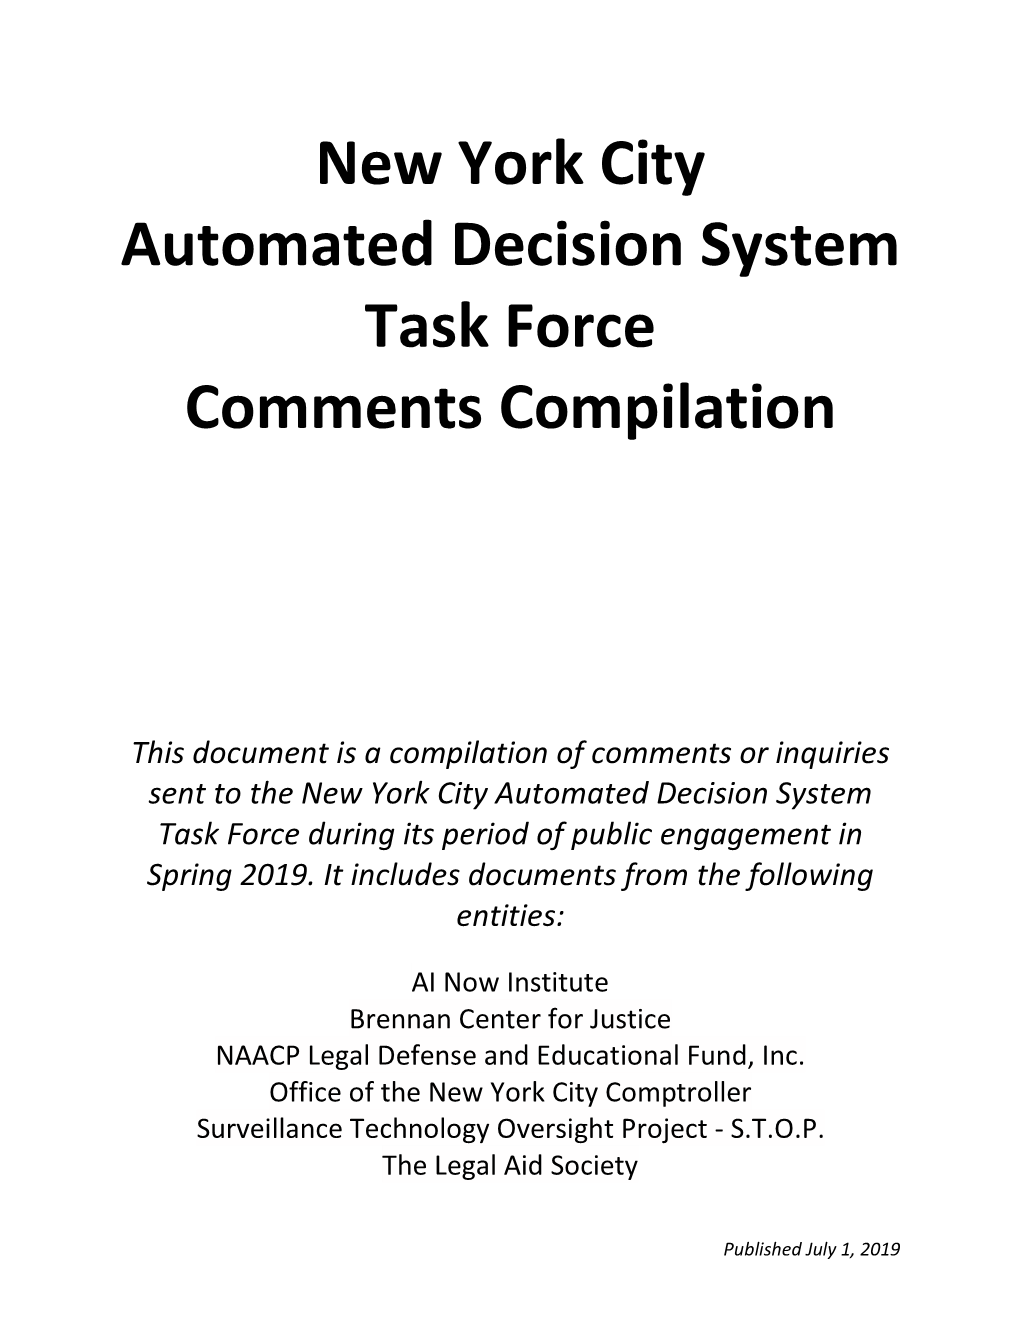 New York City Automated Decision System Task Force Comments Compilation